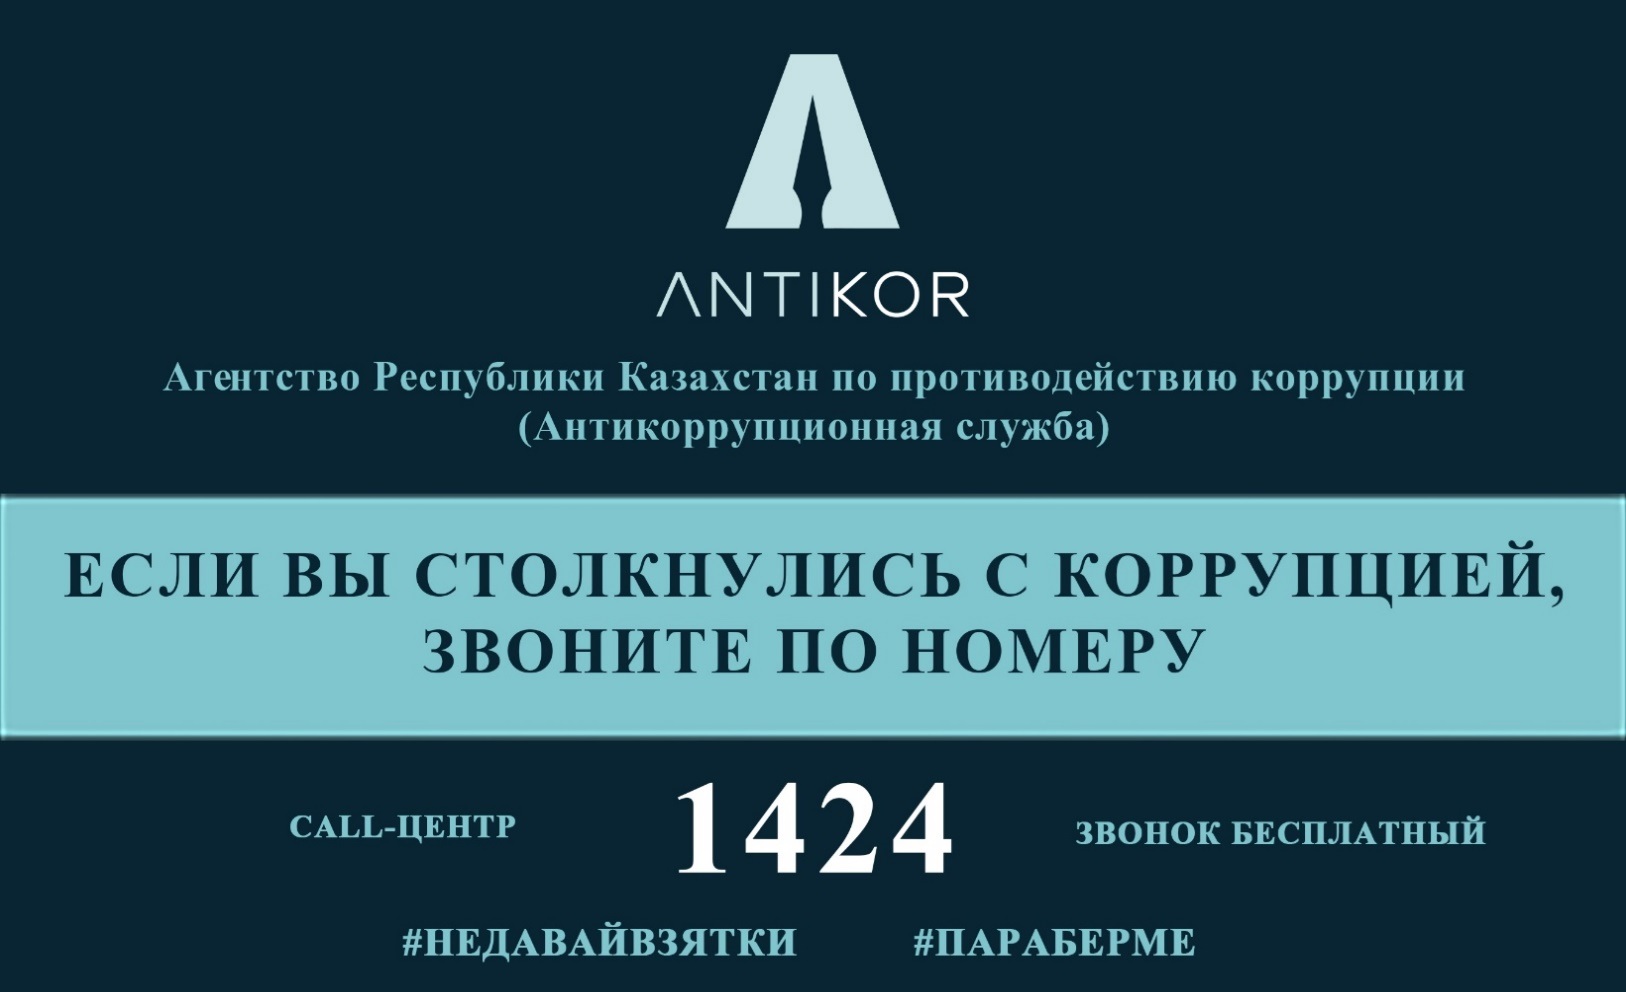 Call center of the anti-corruption agency of the Republic of Kazakhstan